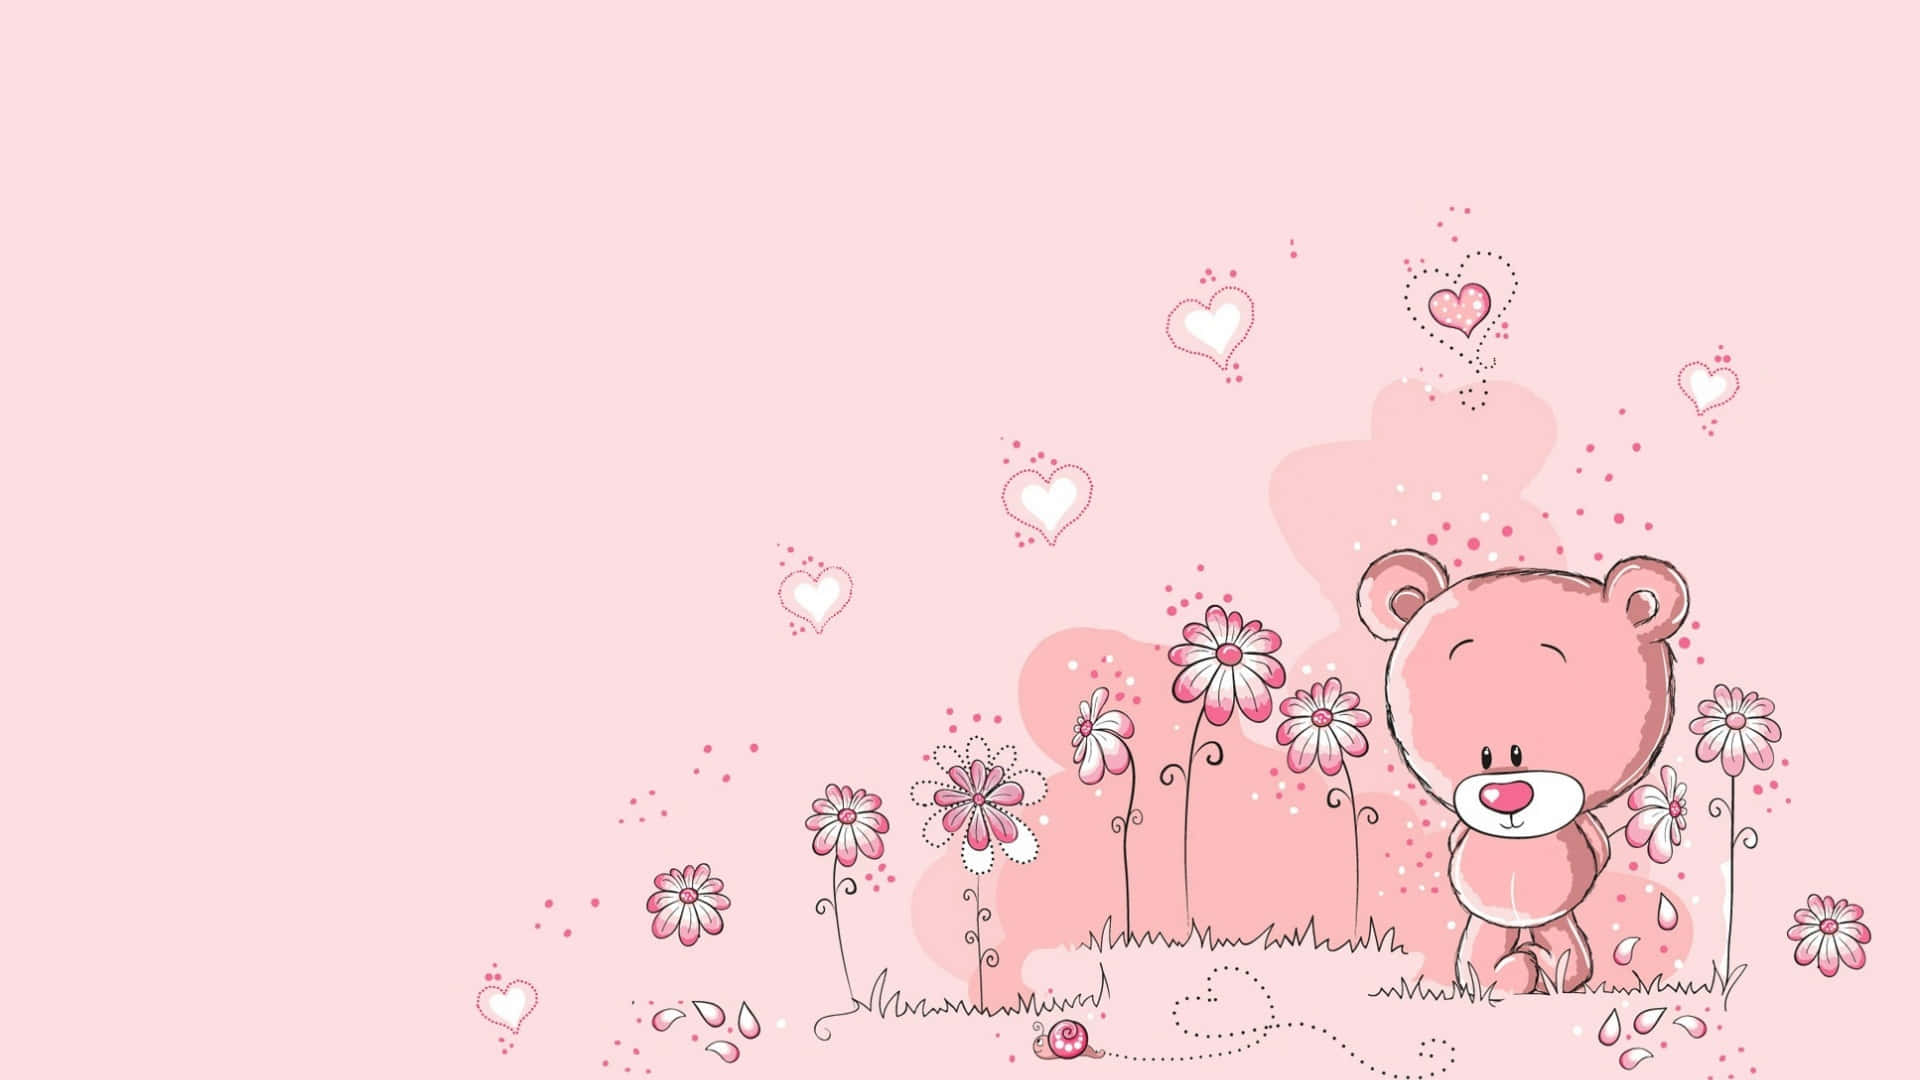 Customize Your Desktop With A Girly Theme Background